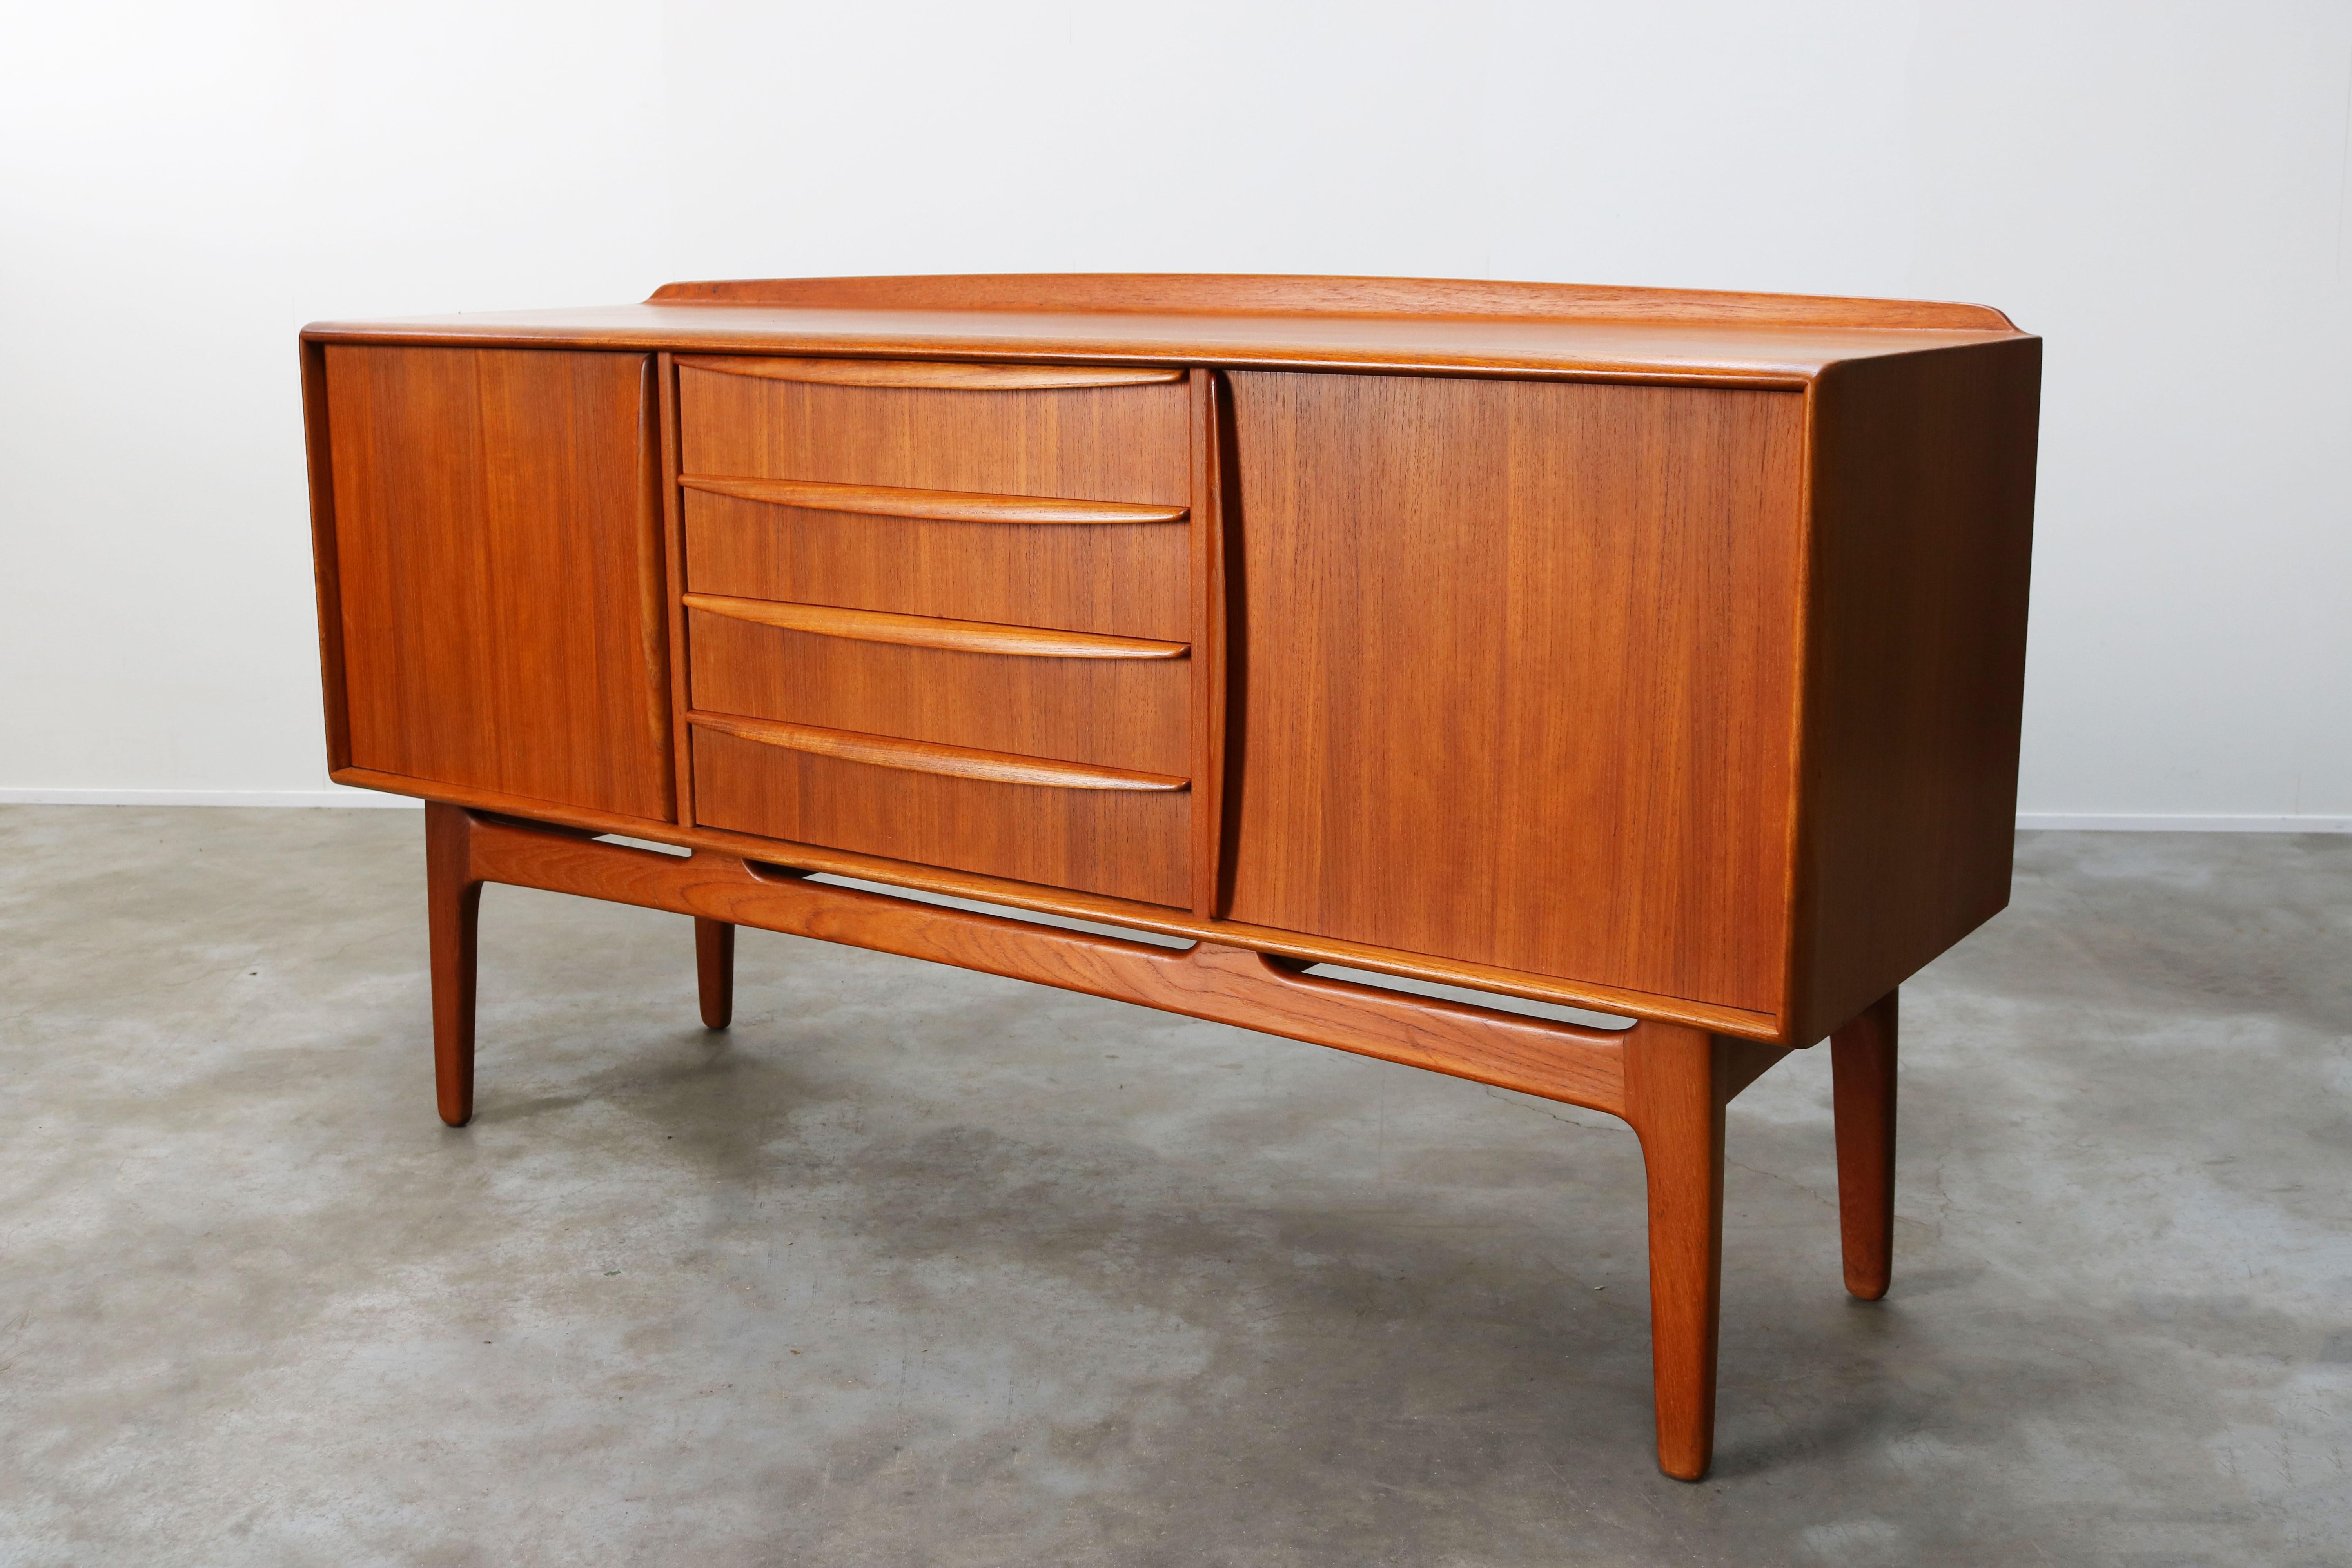 Magnificent Danish design credenza / sideboard in teak designed by Svend Aage Madsen for K. Knudsen & Son in the 1950s. The sideboard has wonderful organic lines in a warm teak wood with stunning wood grain. The top of the sideboard has a upstanding